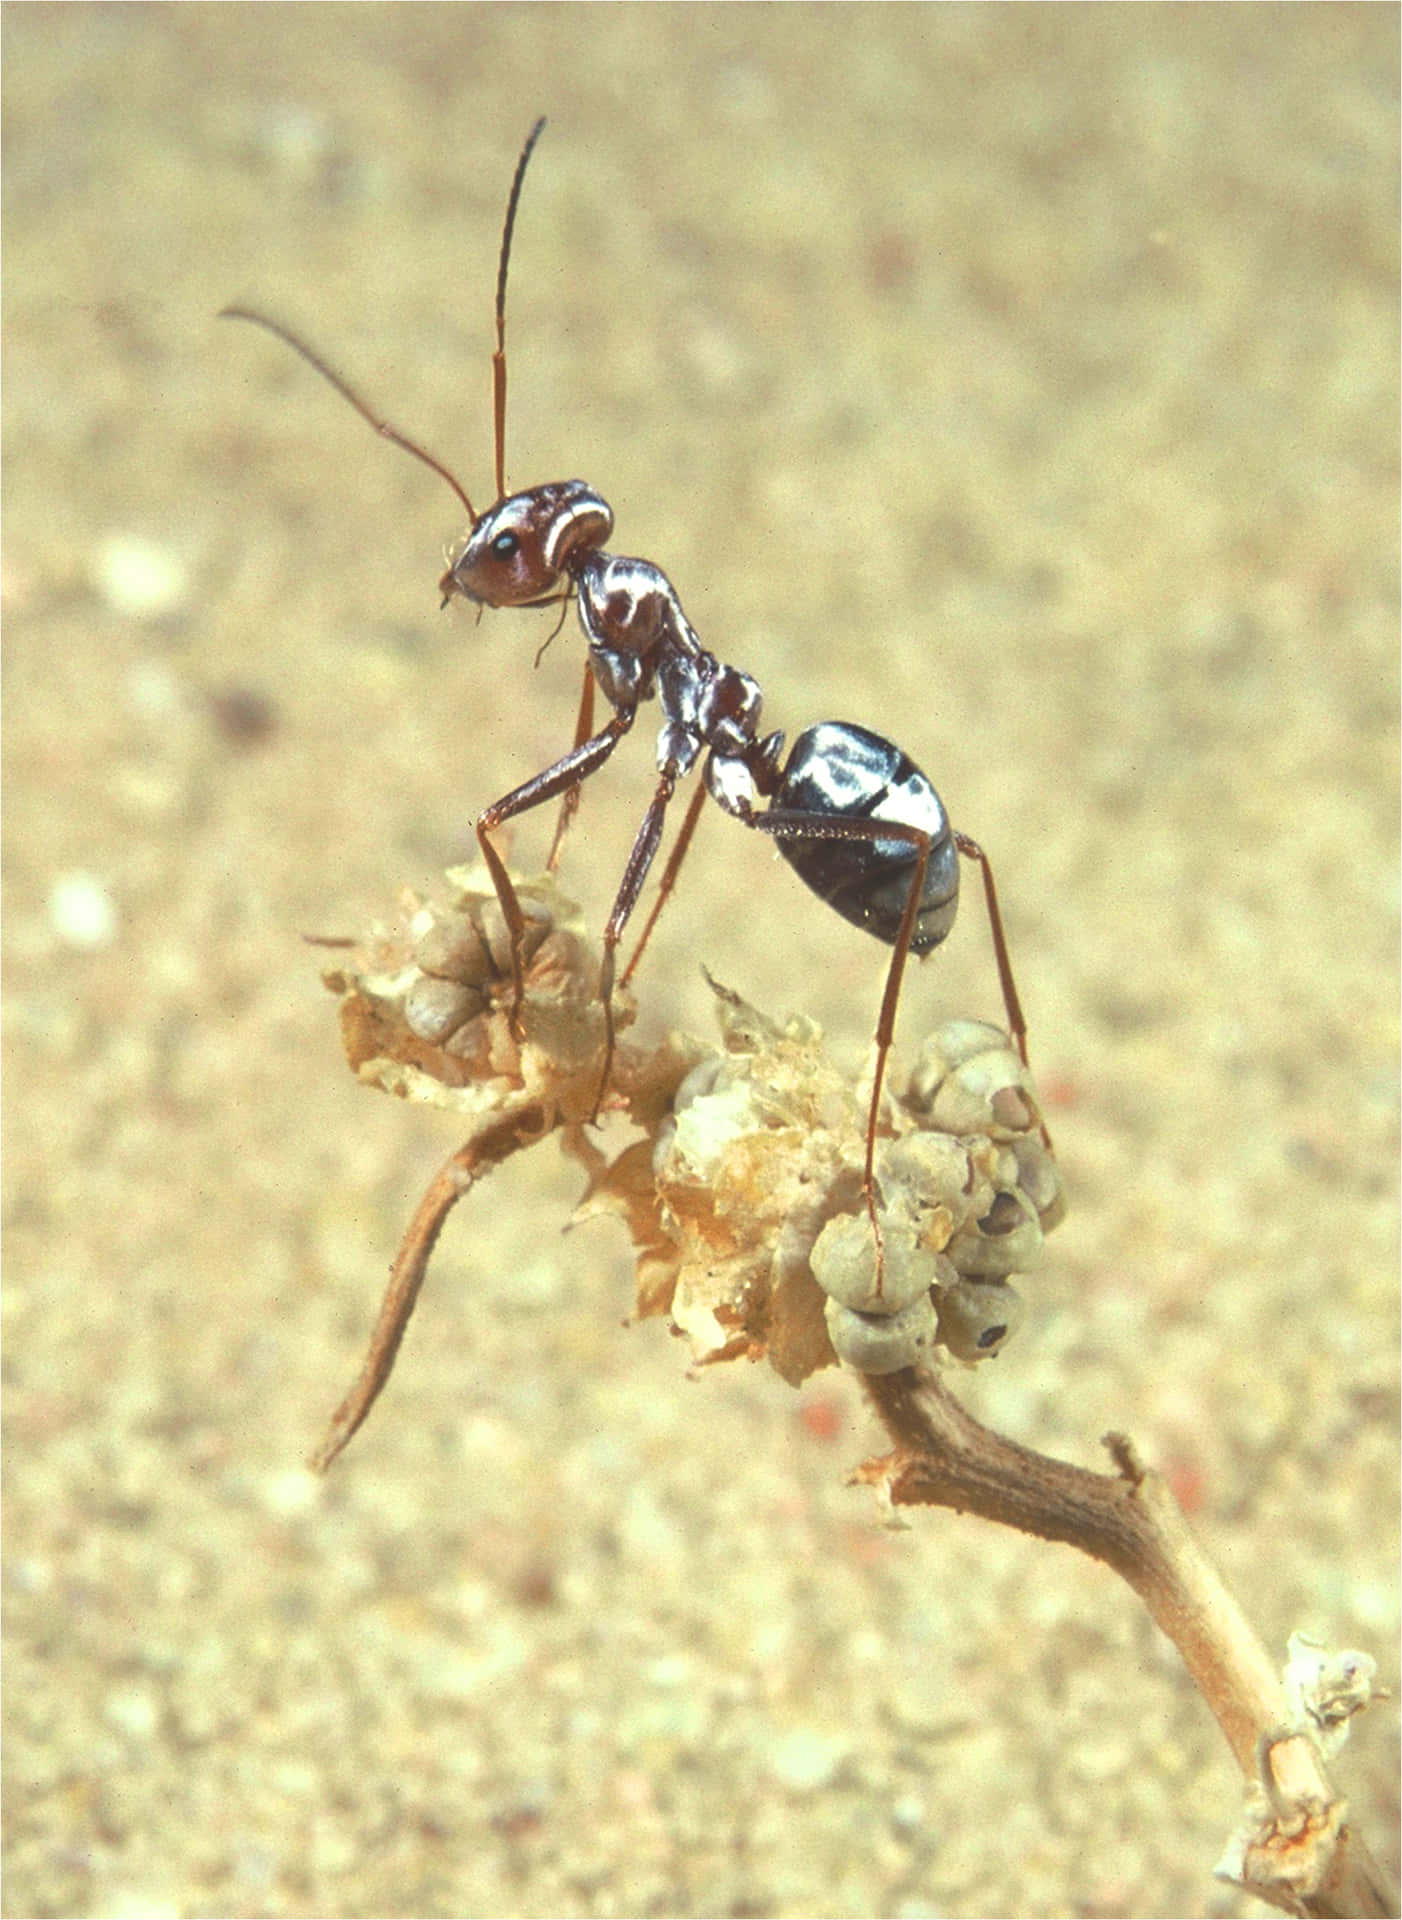 A Small Ant Is Standing On A Plant